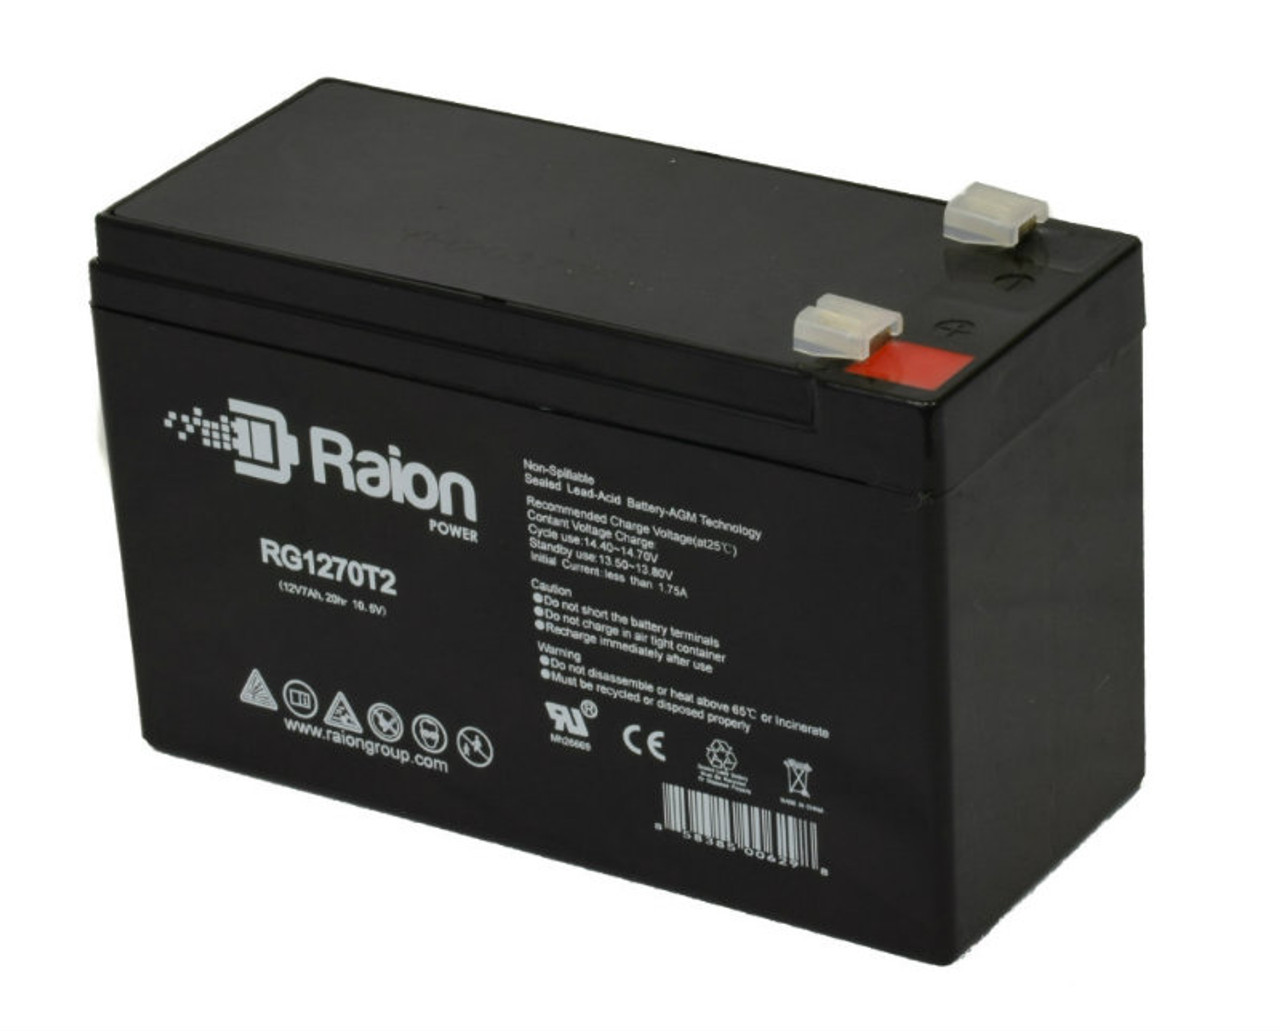 Raion Power Replacement 12V 7Ah RG1270T1 Fire Alarm Battery for Simplex 4002